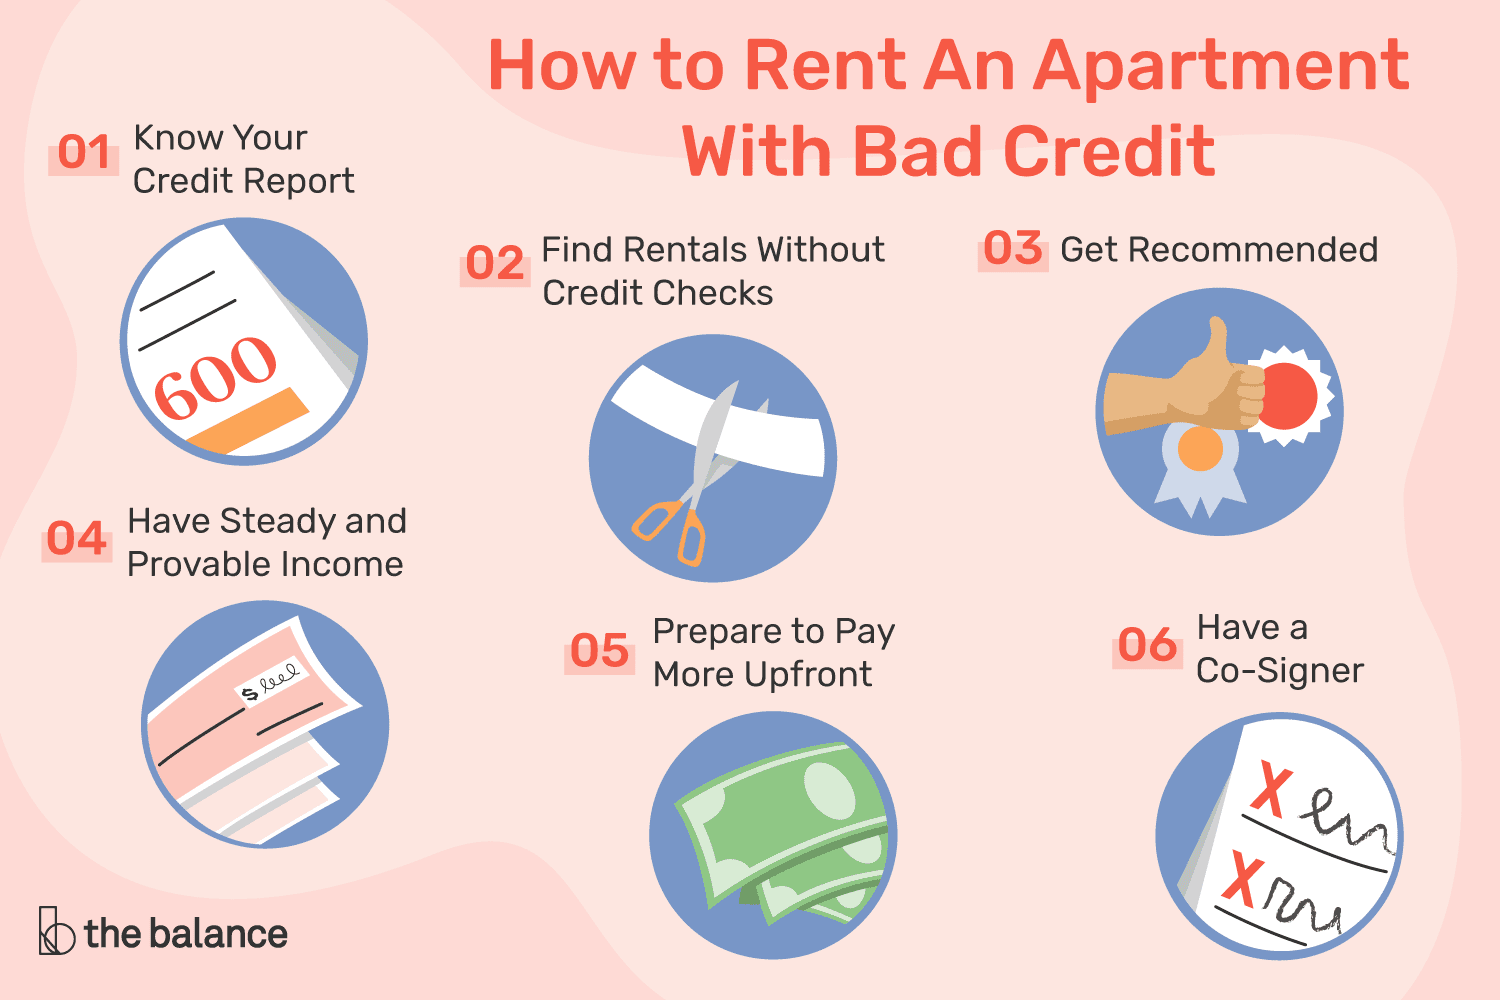 6 Ways You Can Rent Even With Bad Credit